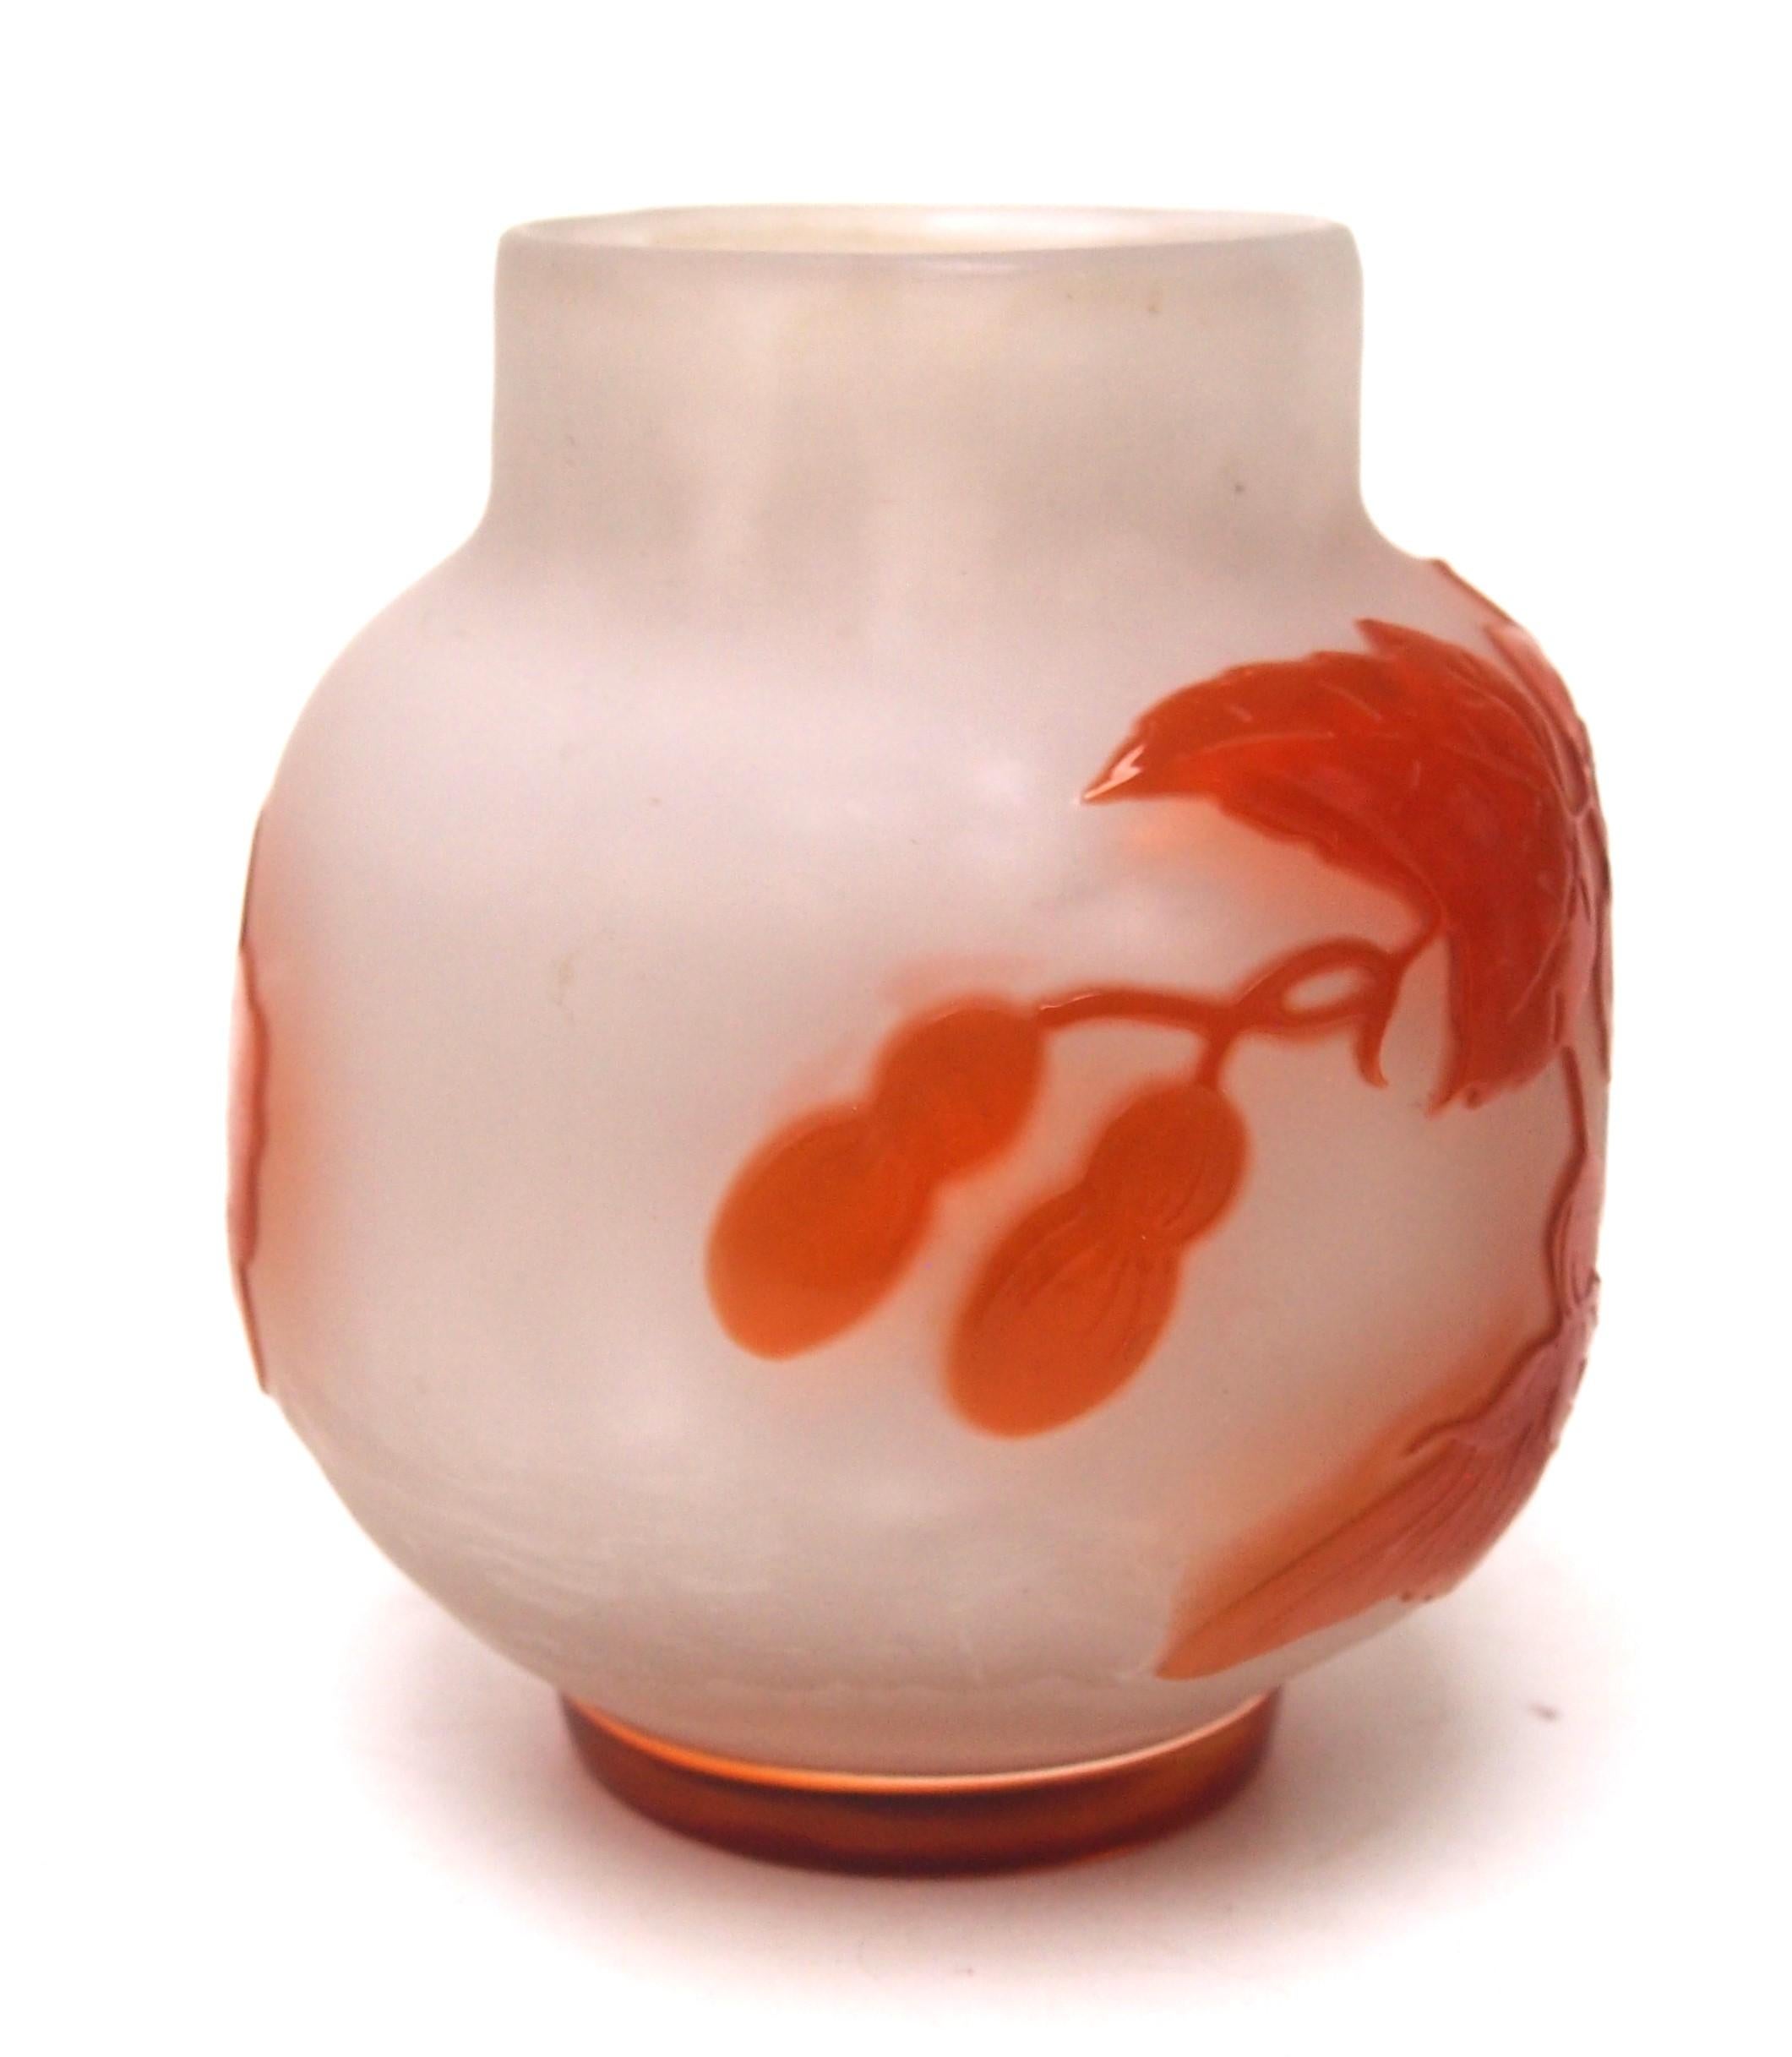 Early 20th Century Striking Early French Art Nouveau Emile Galle Botanical Cameo Glass Vase -c1900 For Sale